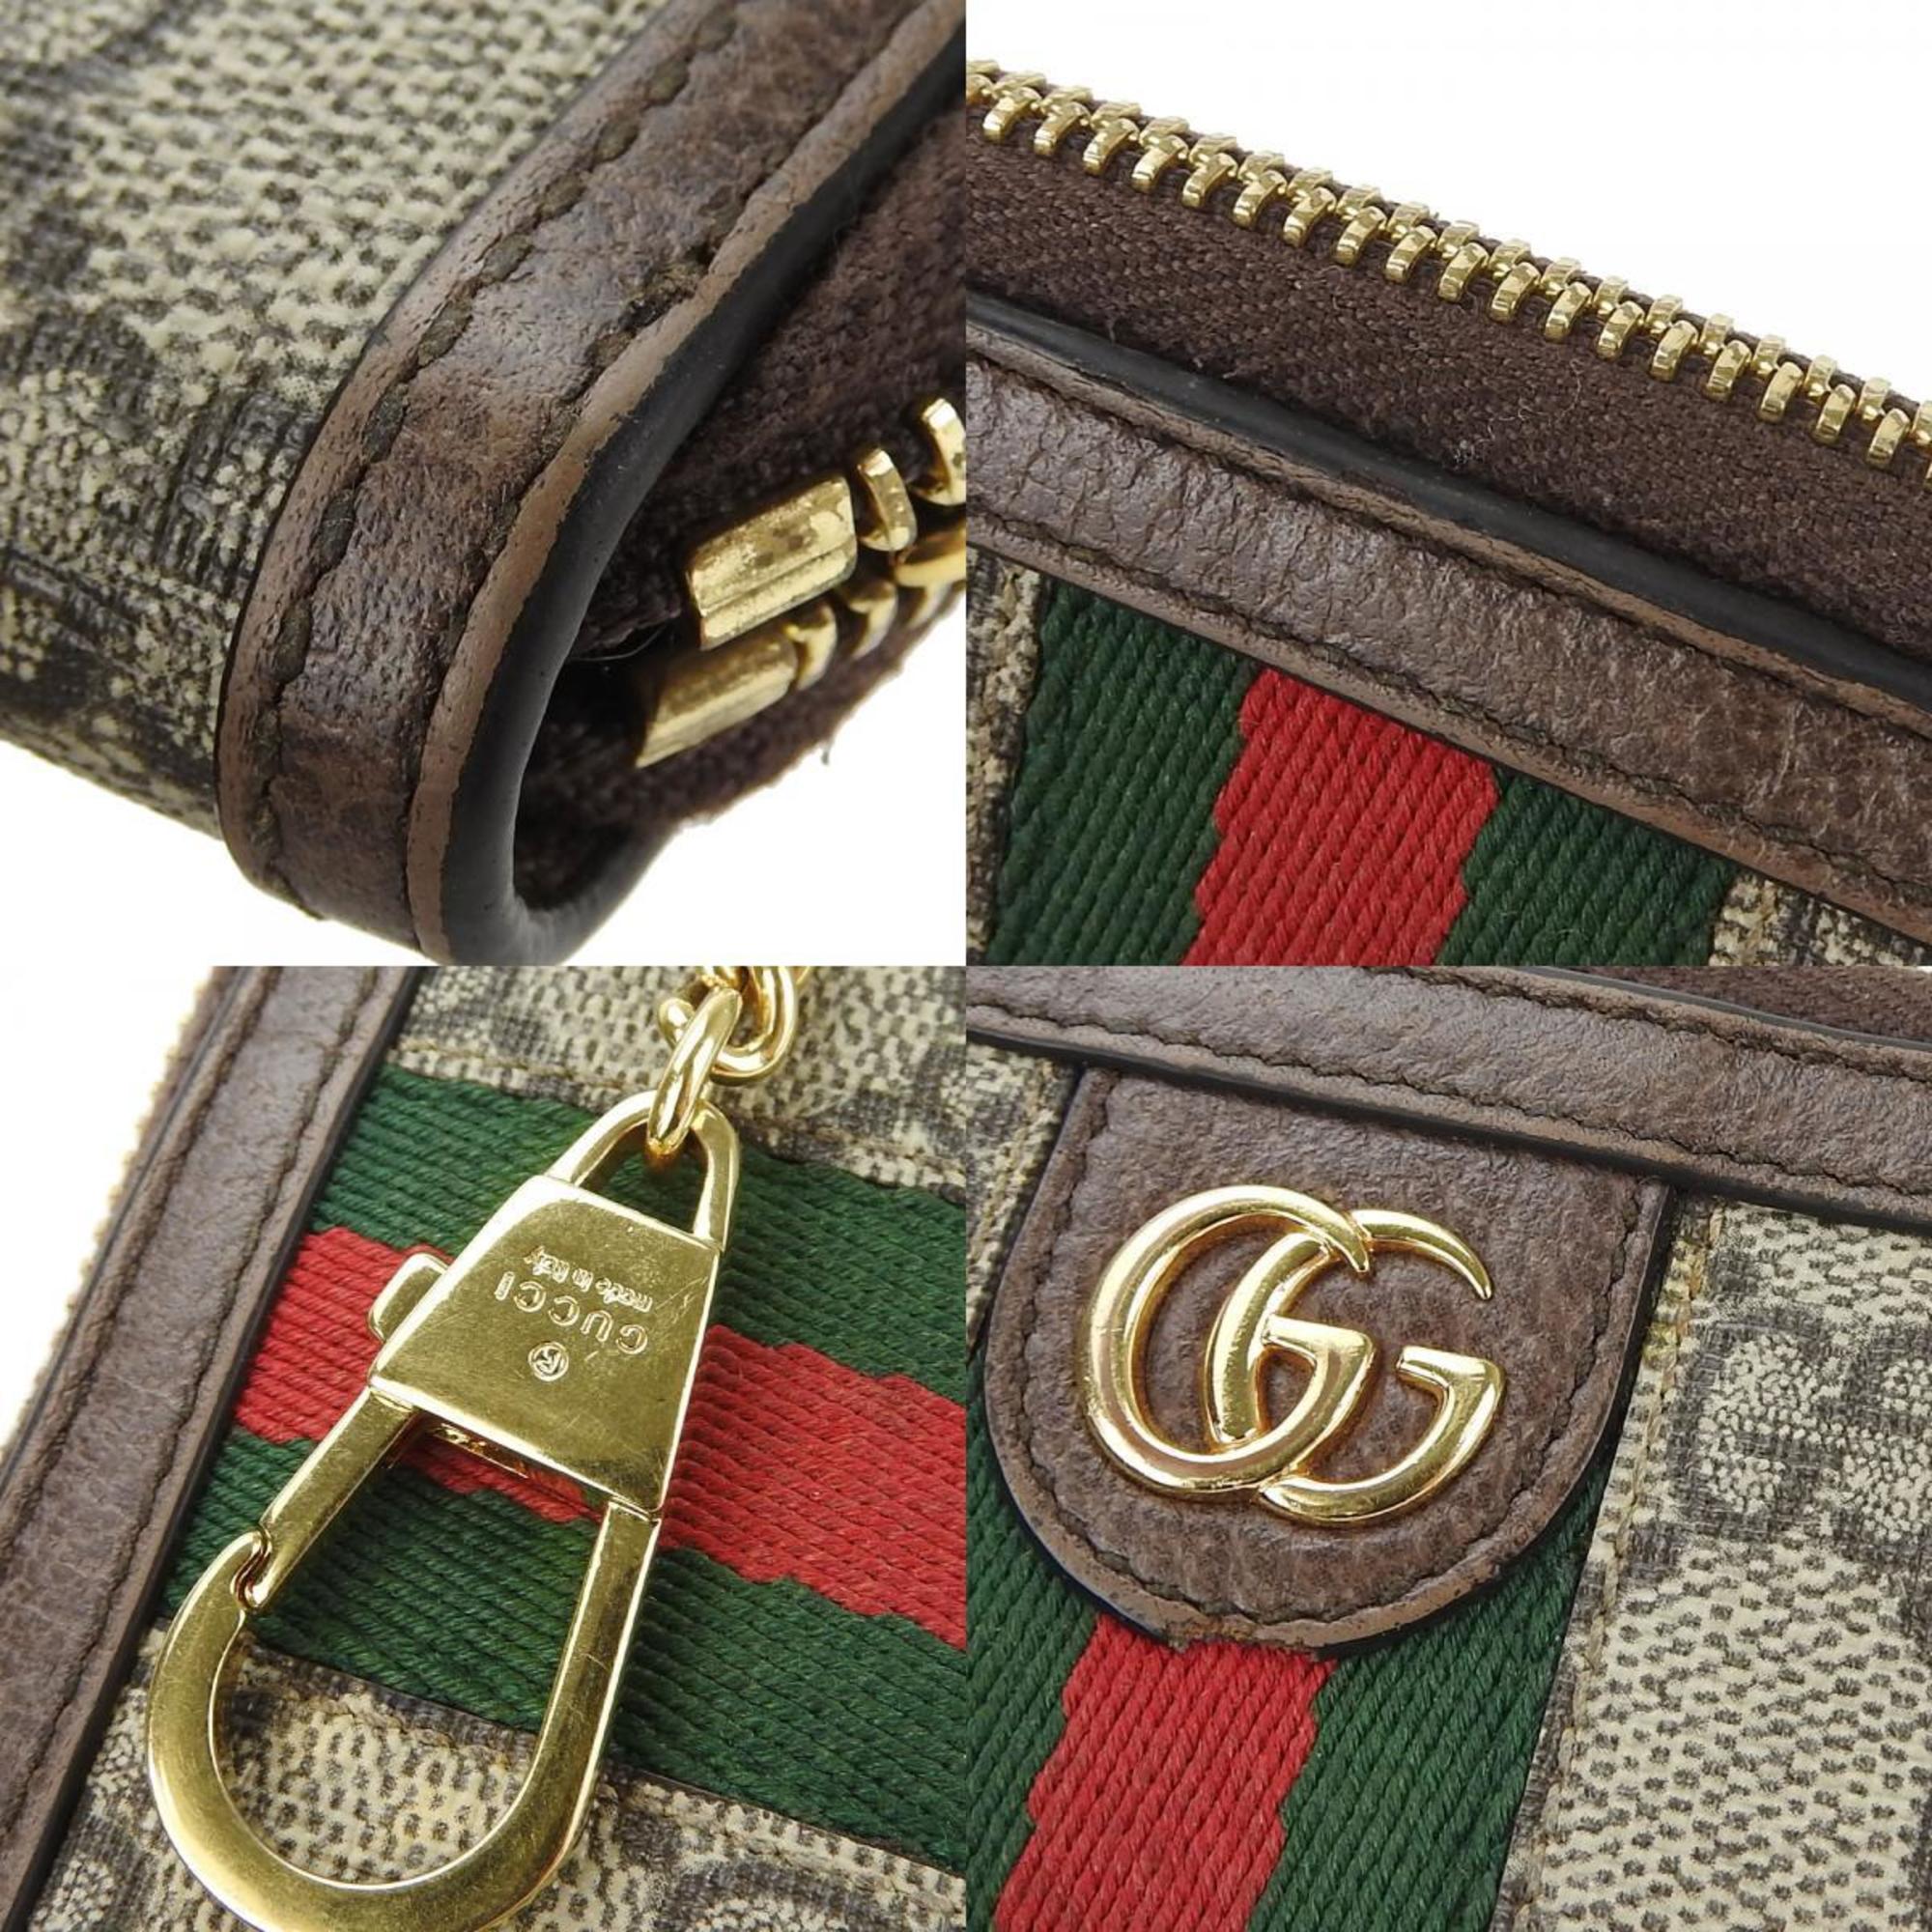 Gucci Key Case Offdia 523157 Sherry Line GG Supreme Canvas Leather Brown Ribbon Ring GUCCI